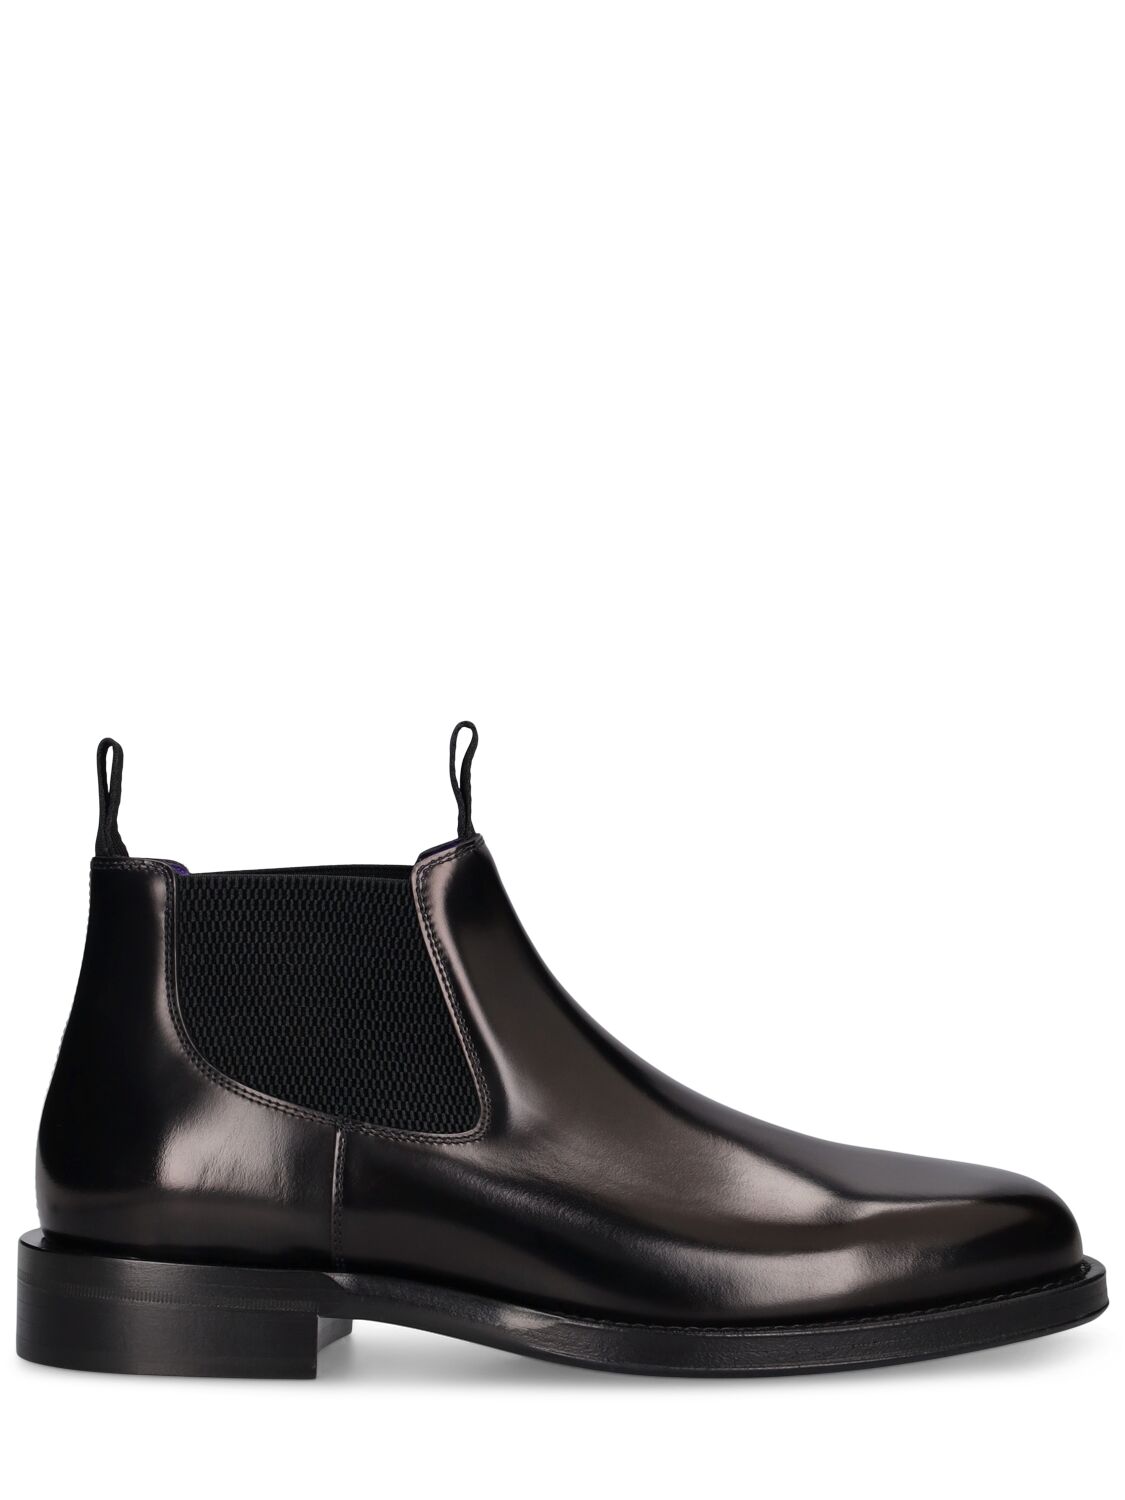 Image of Mf Tux Leather Low Chelsea Boots